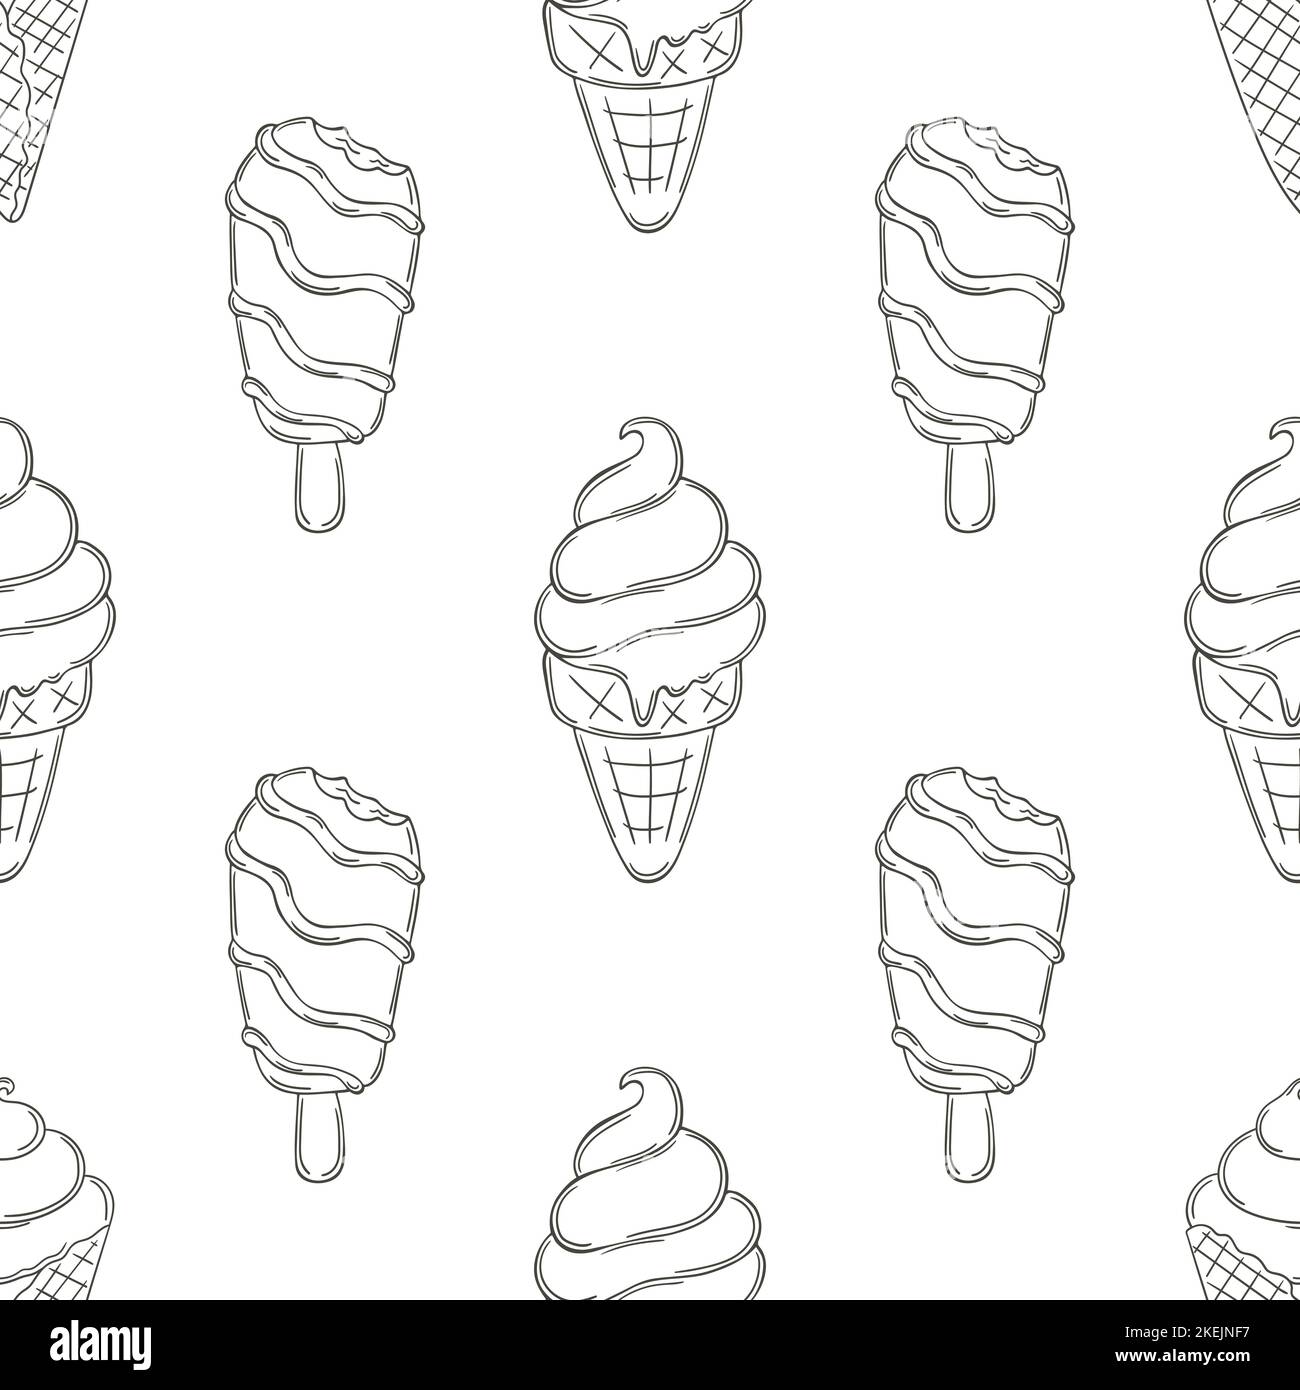 Summer. Coloring ice cream seamless pattern. Wonderful pattern with cold dessert. Print for cloth design, textile, fabric, wallpaper Stock Vector